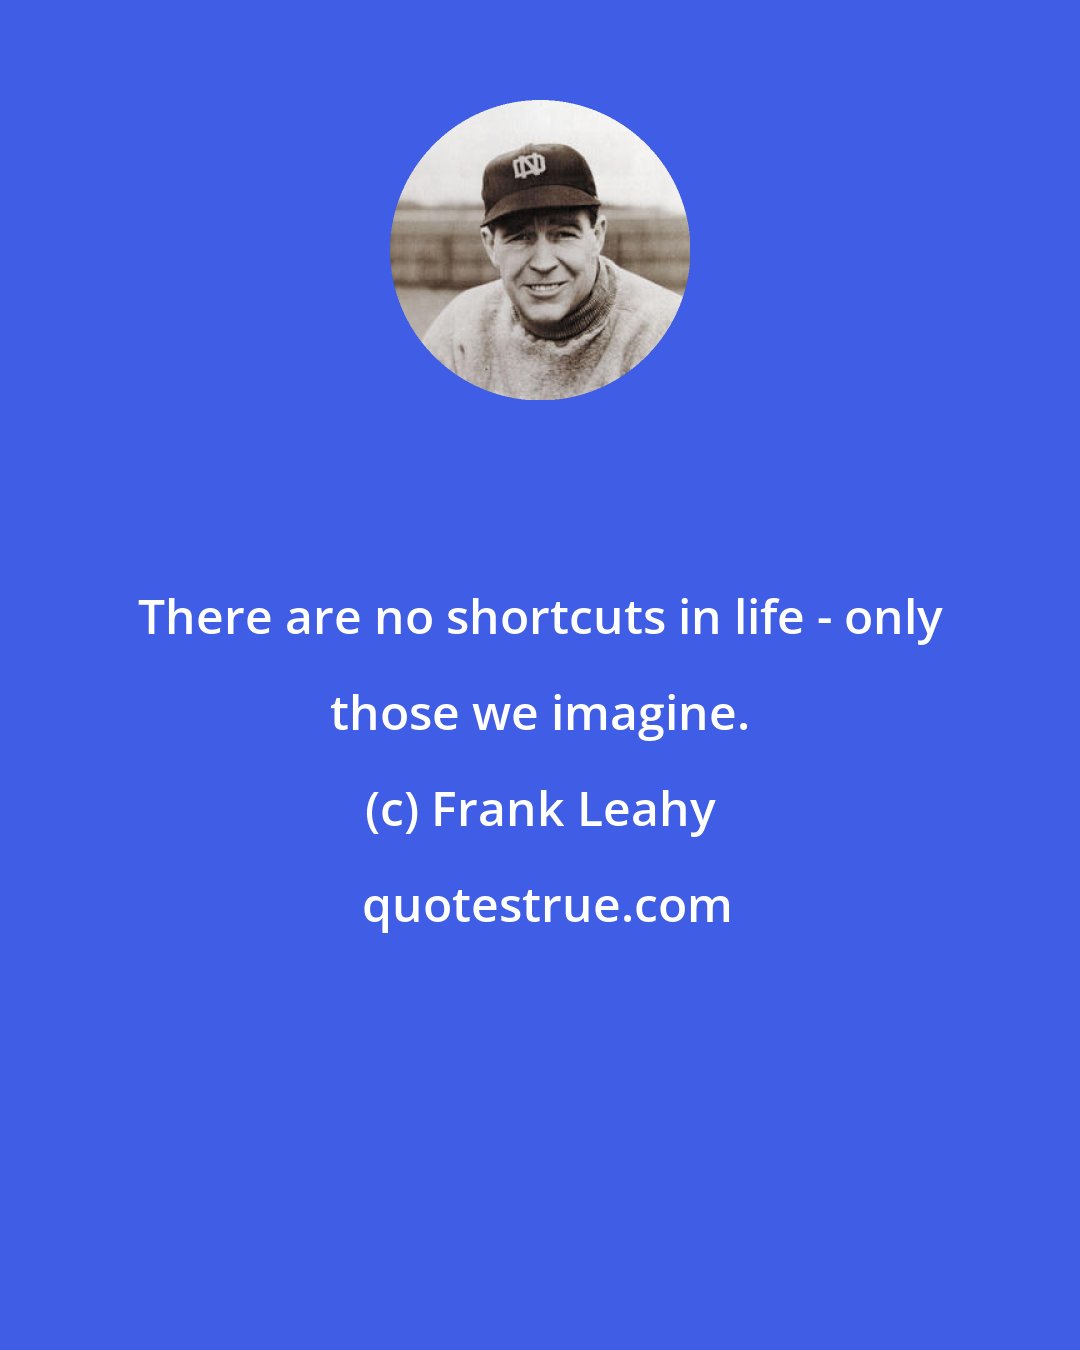 Frank Leahy: There are no shortcuts in life - only those we imagine.